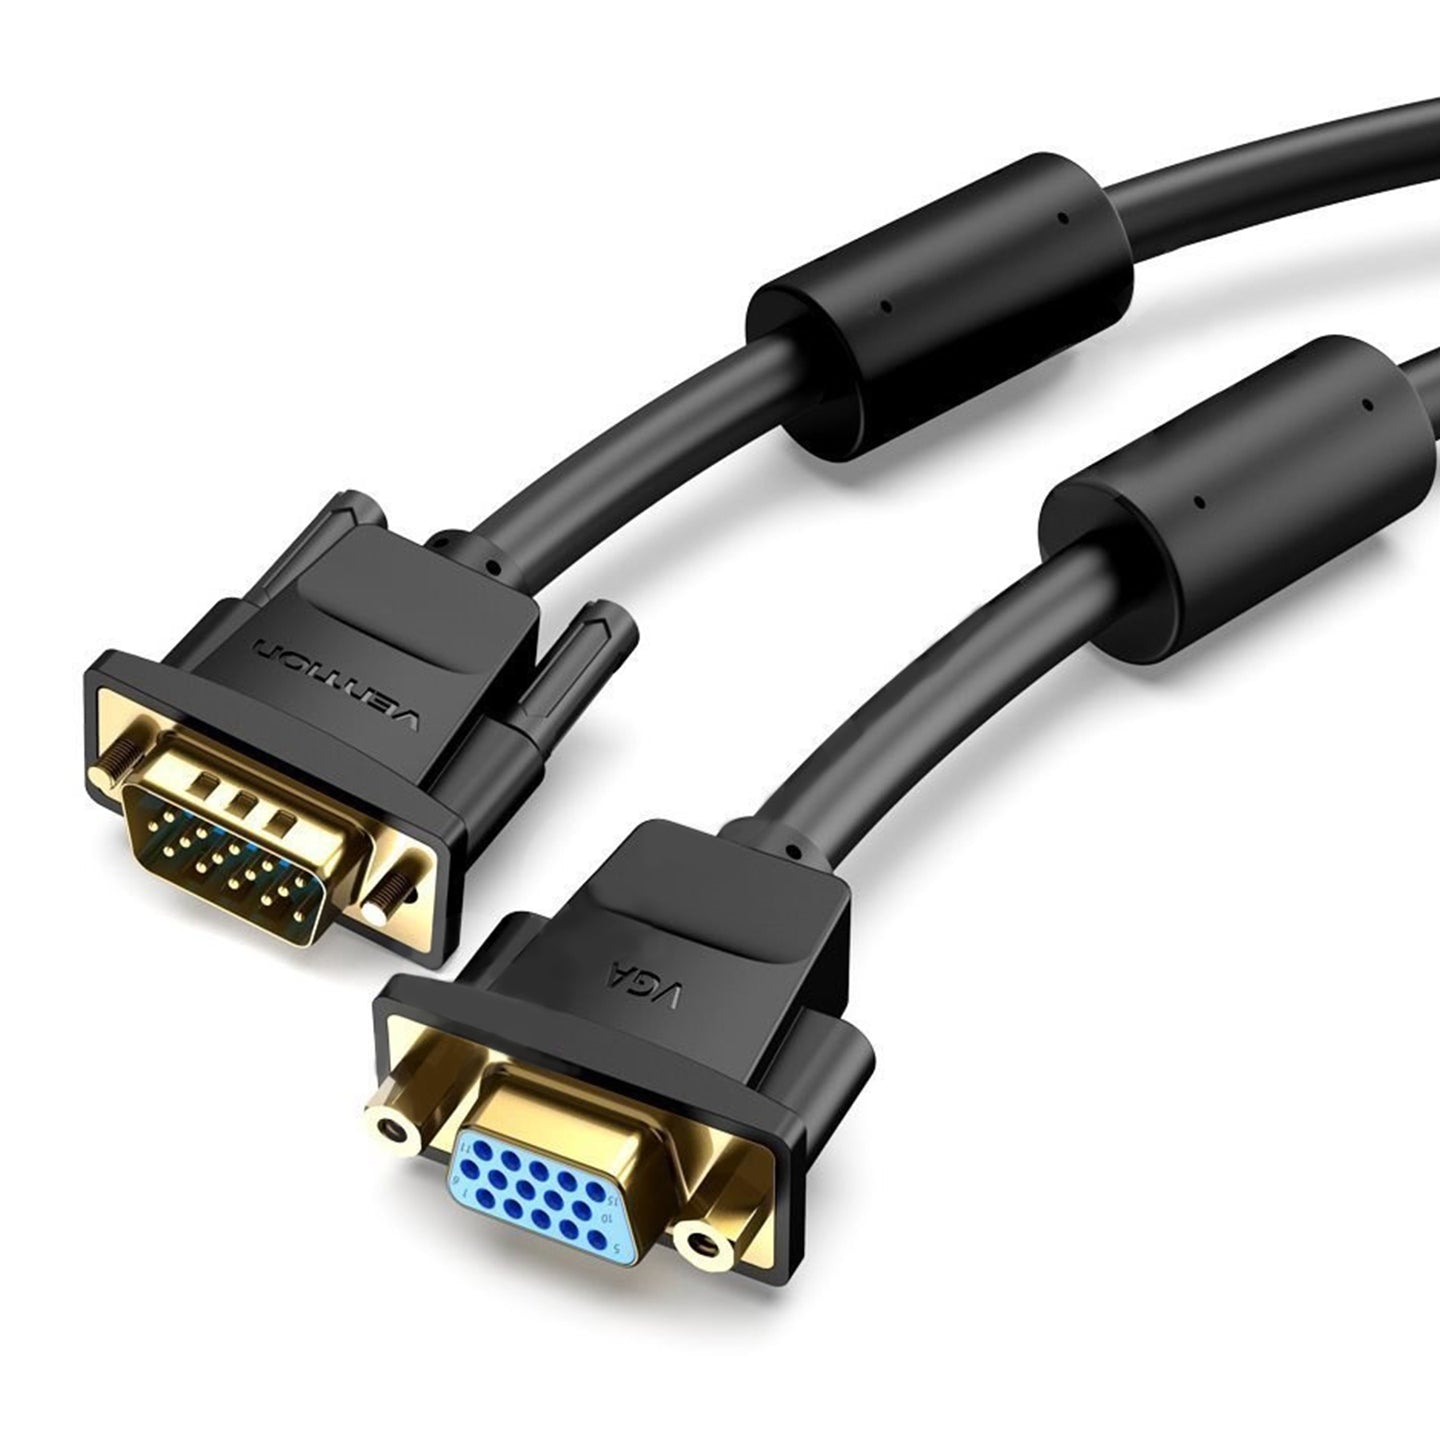 Vention VGA Male to VGA Female (3+6) Gold-Plated Extension Cable Cord with Full HD Resolution for Laptop and Projector (Available in 1M, 1.5M, 2M, 3M) | DAGB